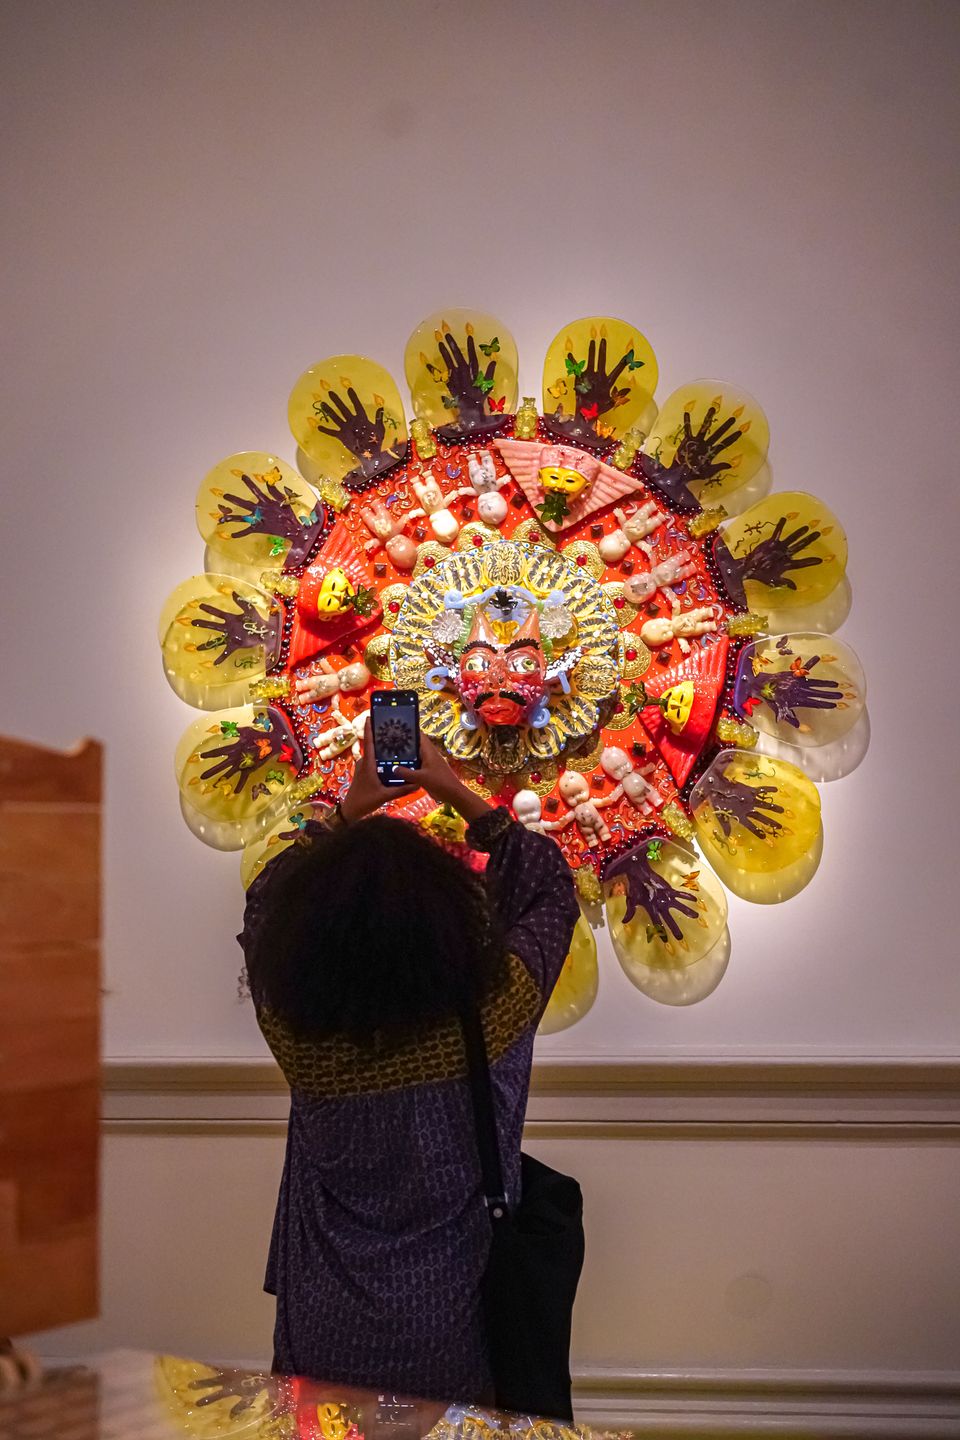 A visitor looks at a bright yellow, circular artwork and is taking a picture with a cell phone.